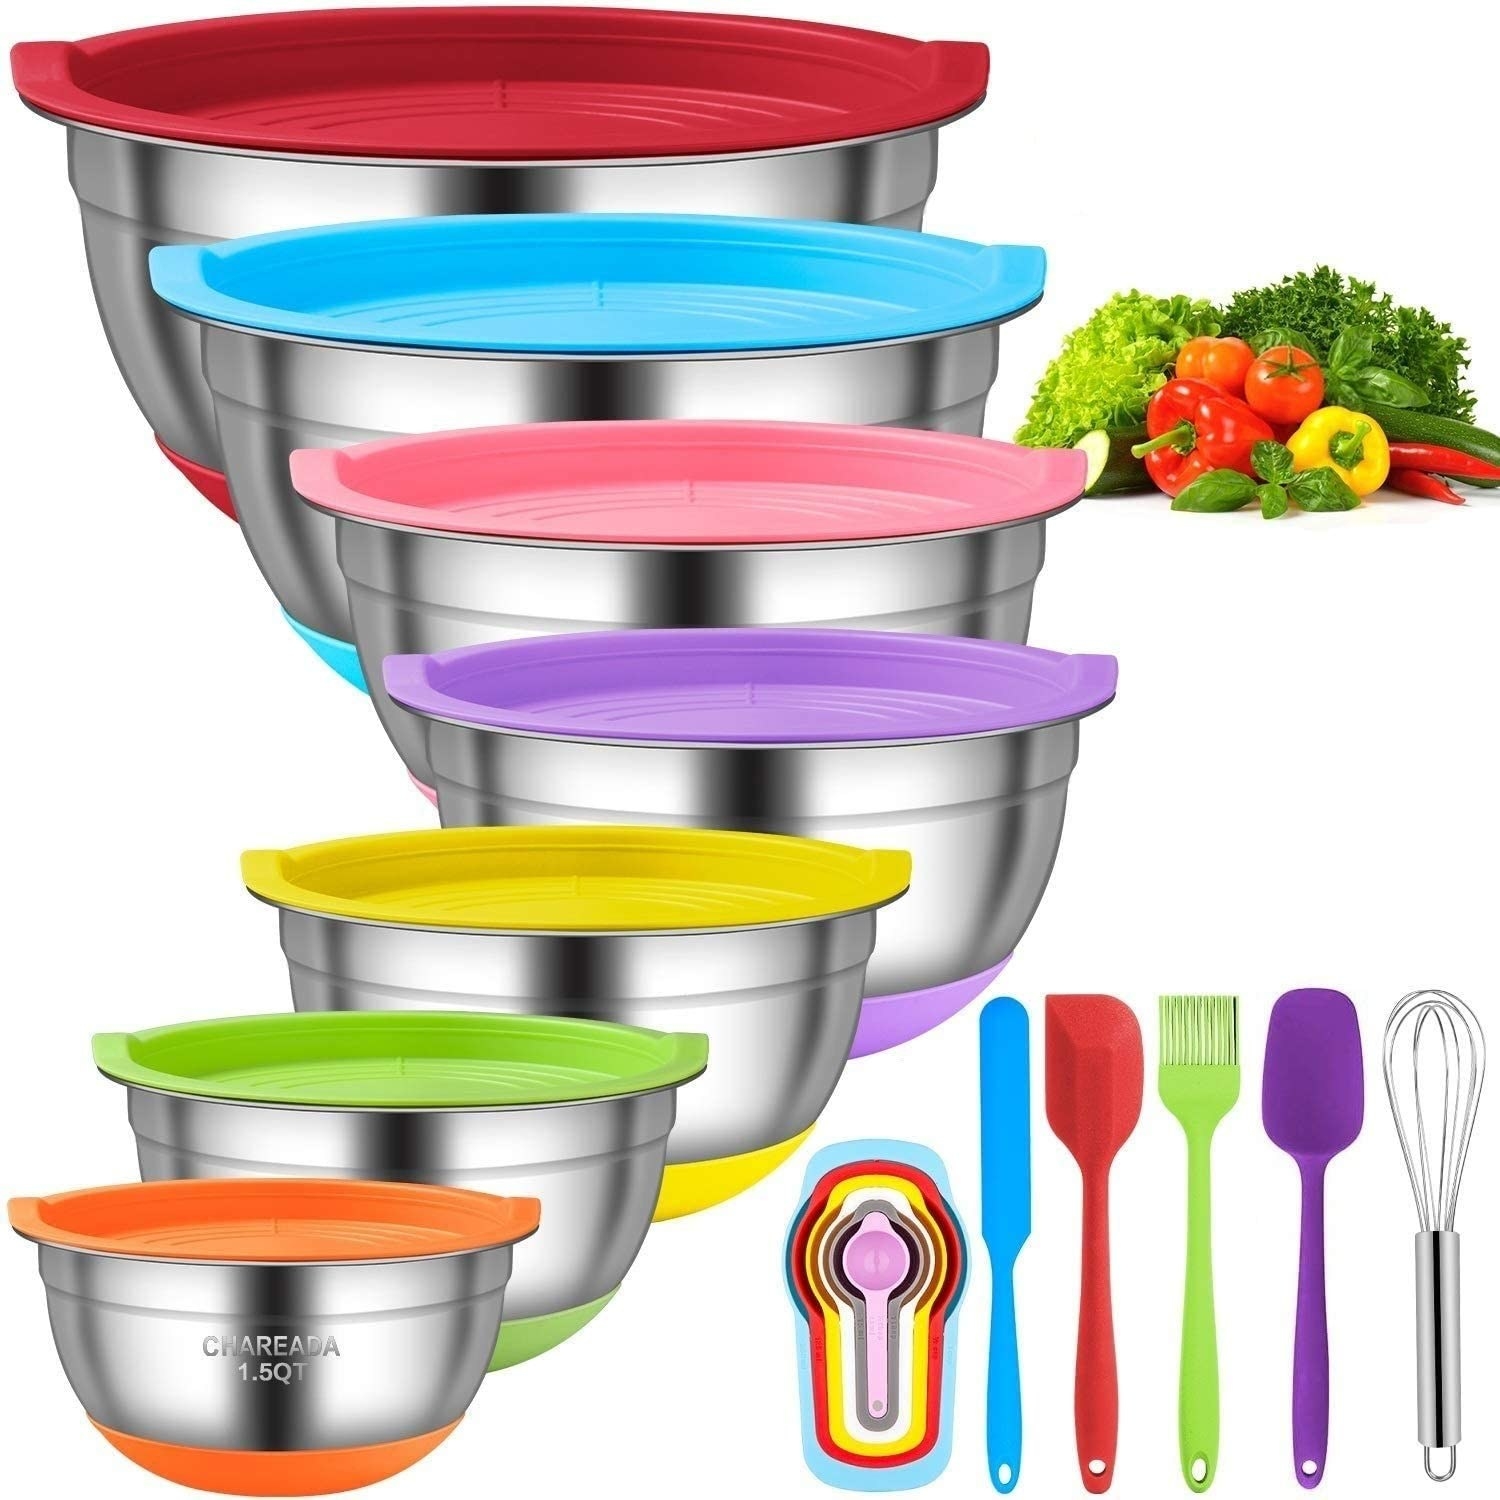 The mixing bowl set with nested measuring spoons and various equipement